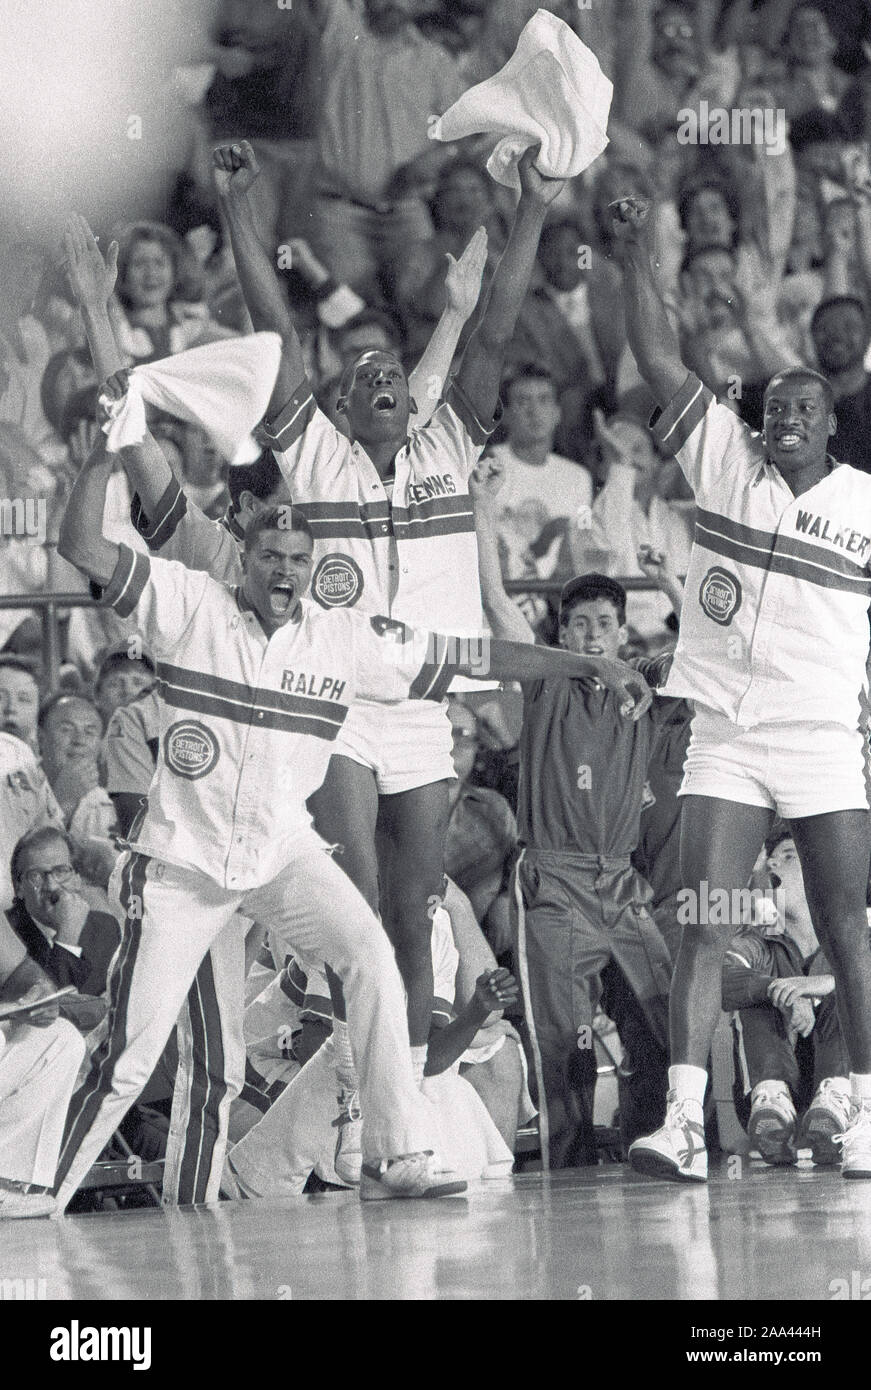 Detroit Pistons  Ralph Lewis  (left)  Dennis Rodman (center) and Walker Russell (right) celebrate as their teams wins during the 1988 NBA Playoffs against the Boston Celtics in Detroit Michigan USA May 1988 photo by bill belknap Stock Photo